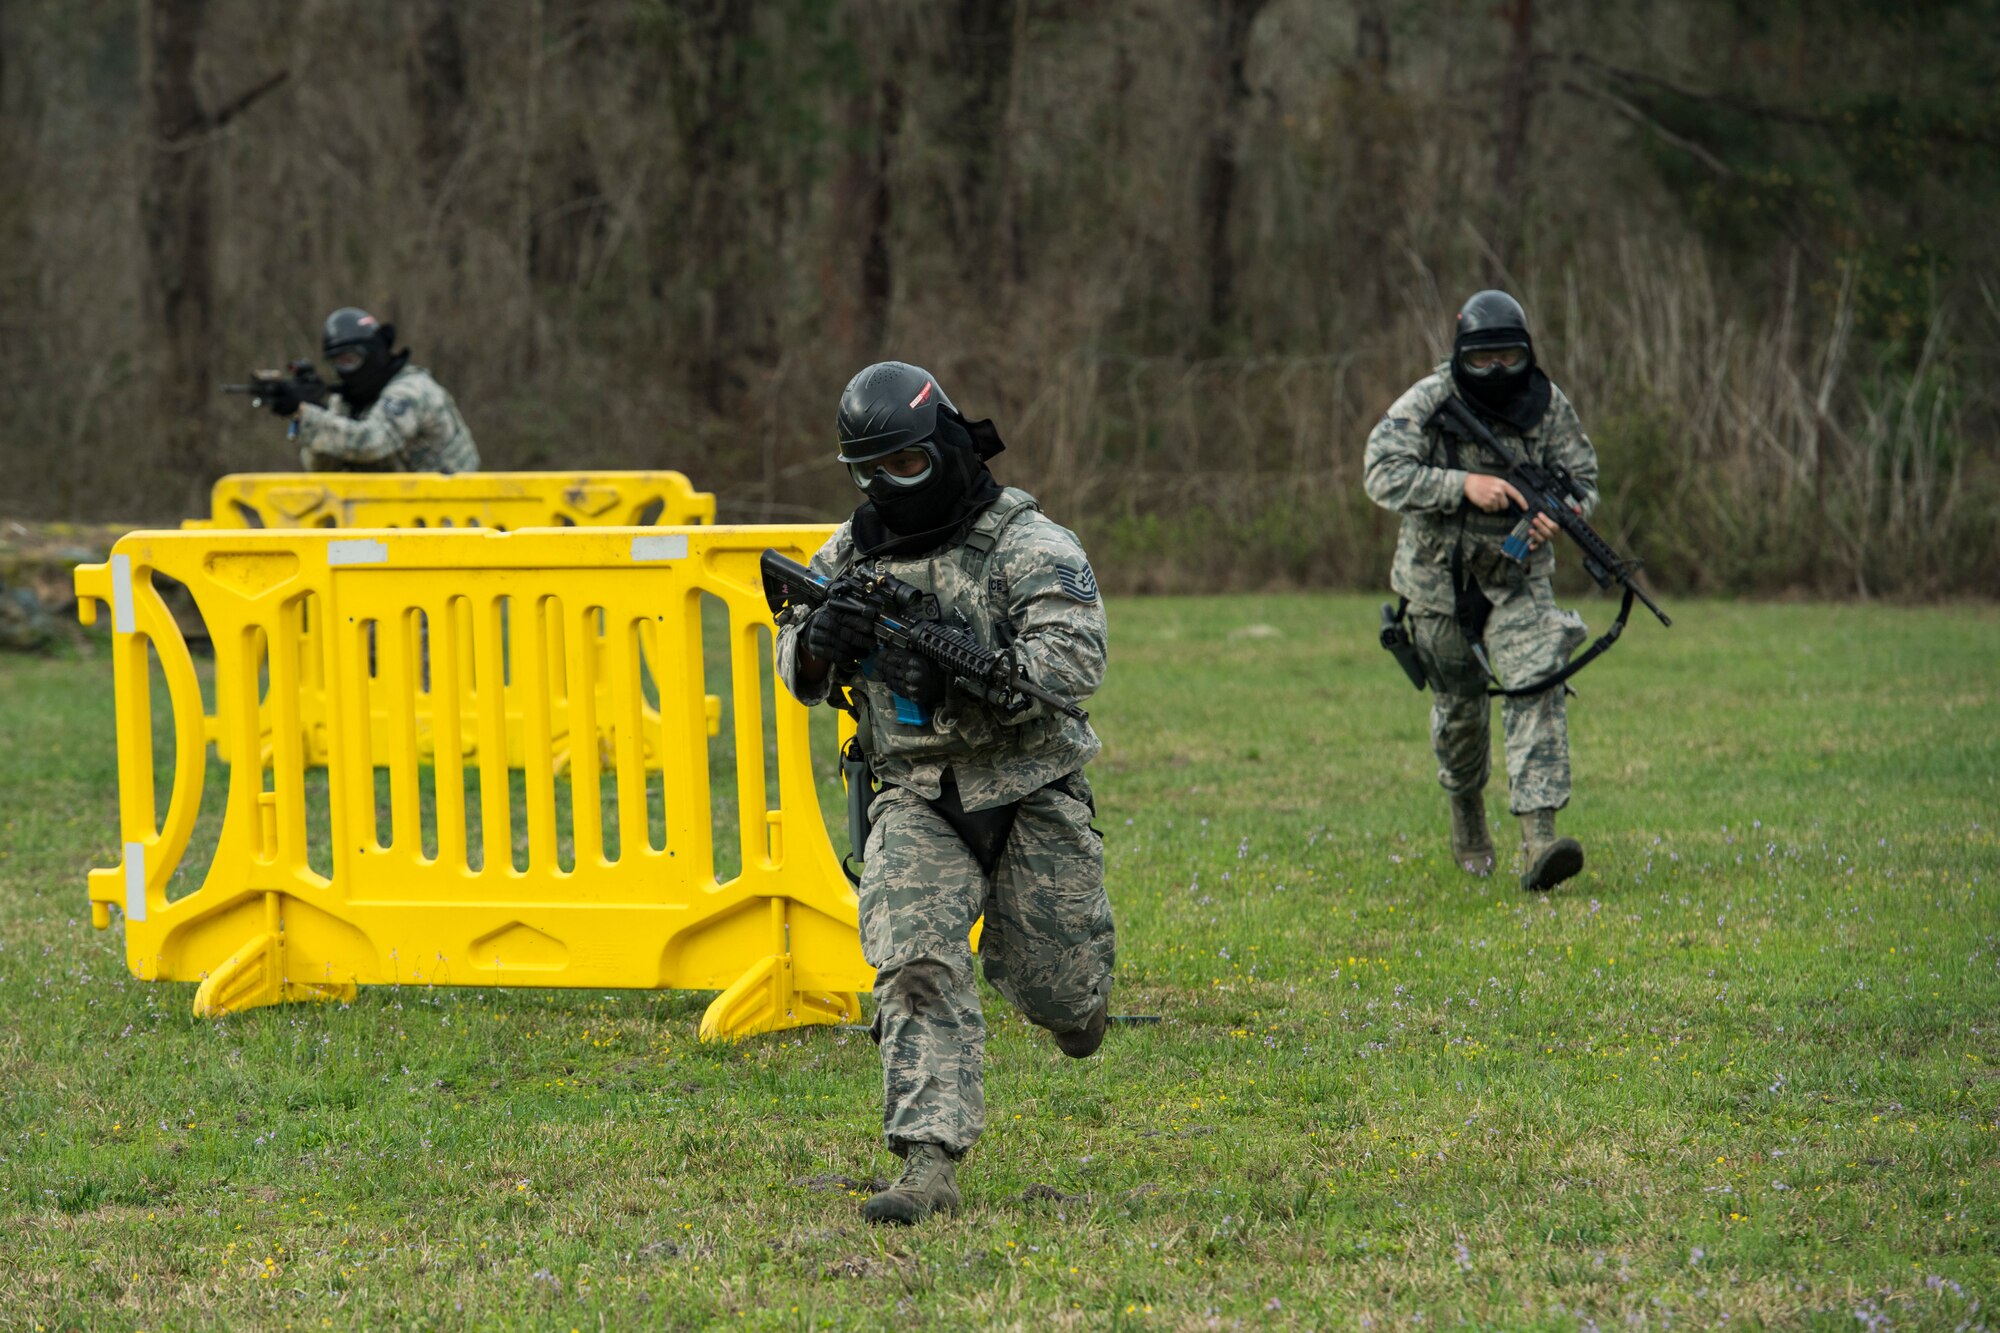 “Shoot, move, communicate” is a training event that tests participants on their ability to move from barricade to barricade as a team. While one member provided covering fire the others advanced on the enemy, then retreated from the scenario while they maintained cover fire. Security Forces members would employ these tactics anytime they’re under enemy fire. (U.S. Air Force photo by Senior Airman Janiqua P. Robinson)